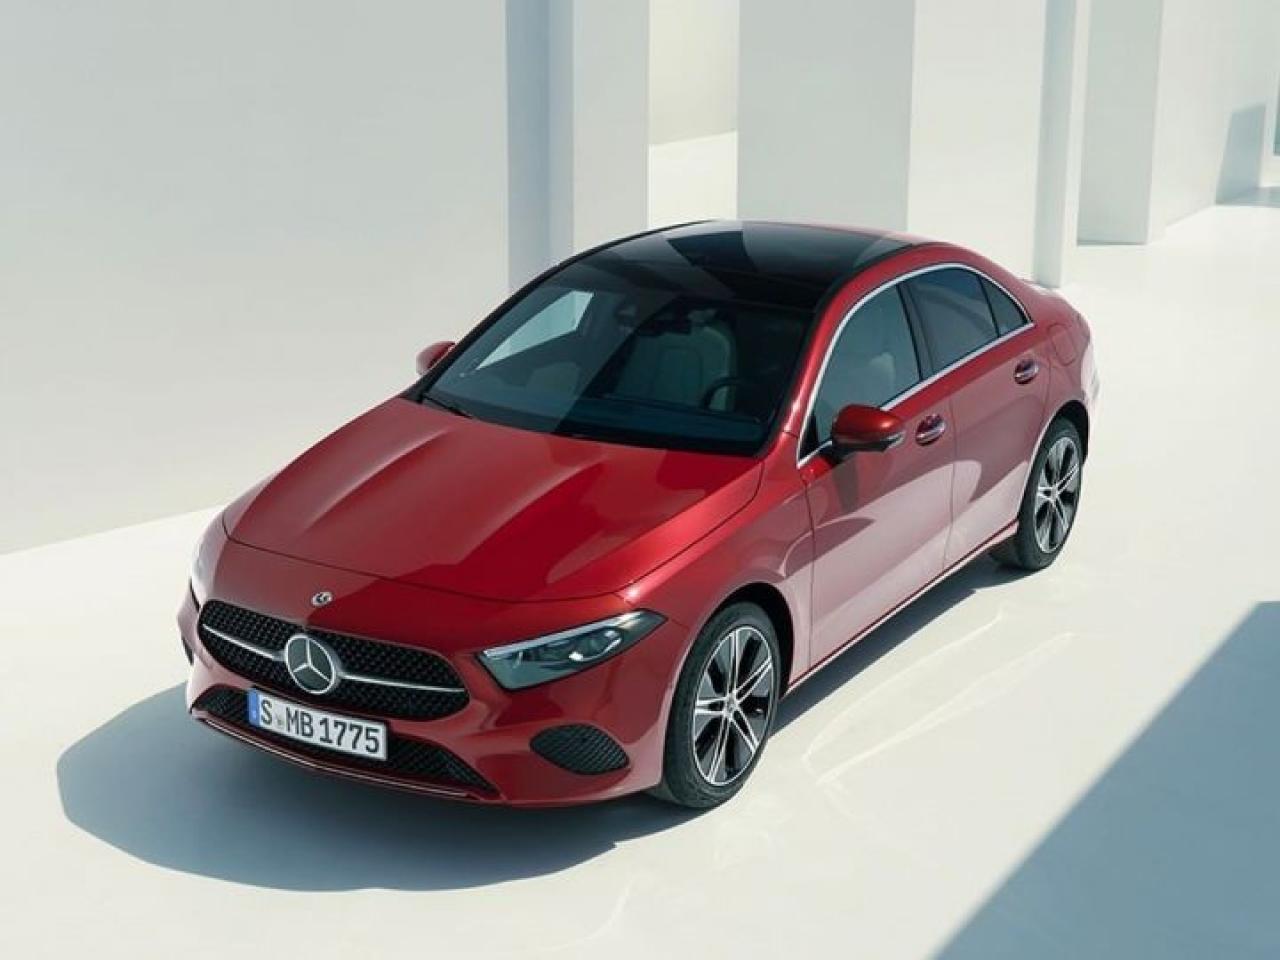 Mercedes Benz A-Class facelift launched in India at Rs. 45.80 lakh -  CarWale, mercedes-benz 